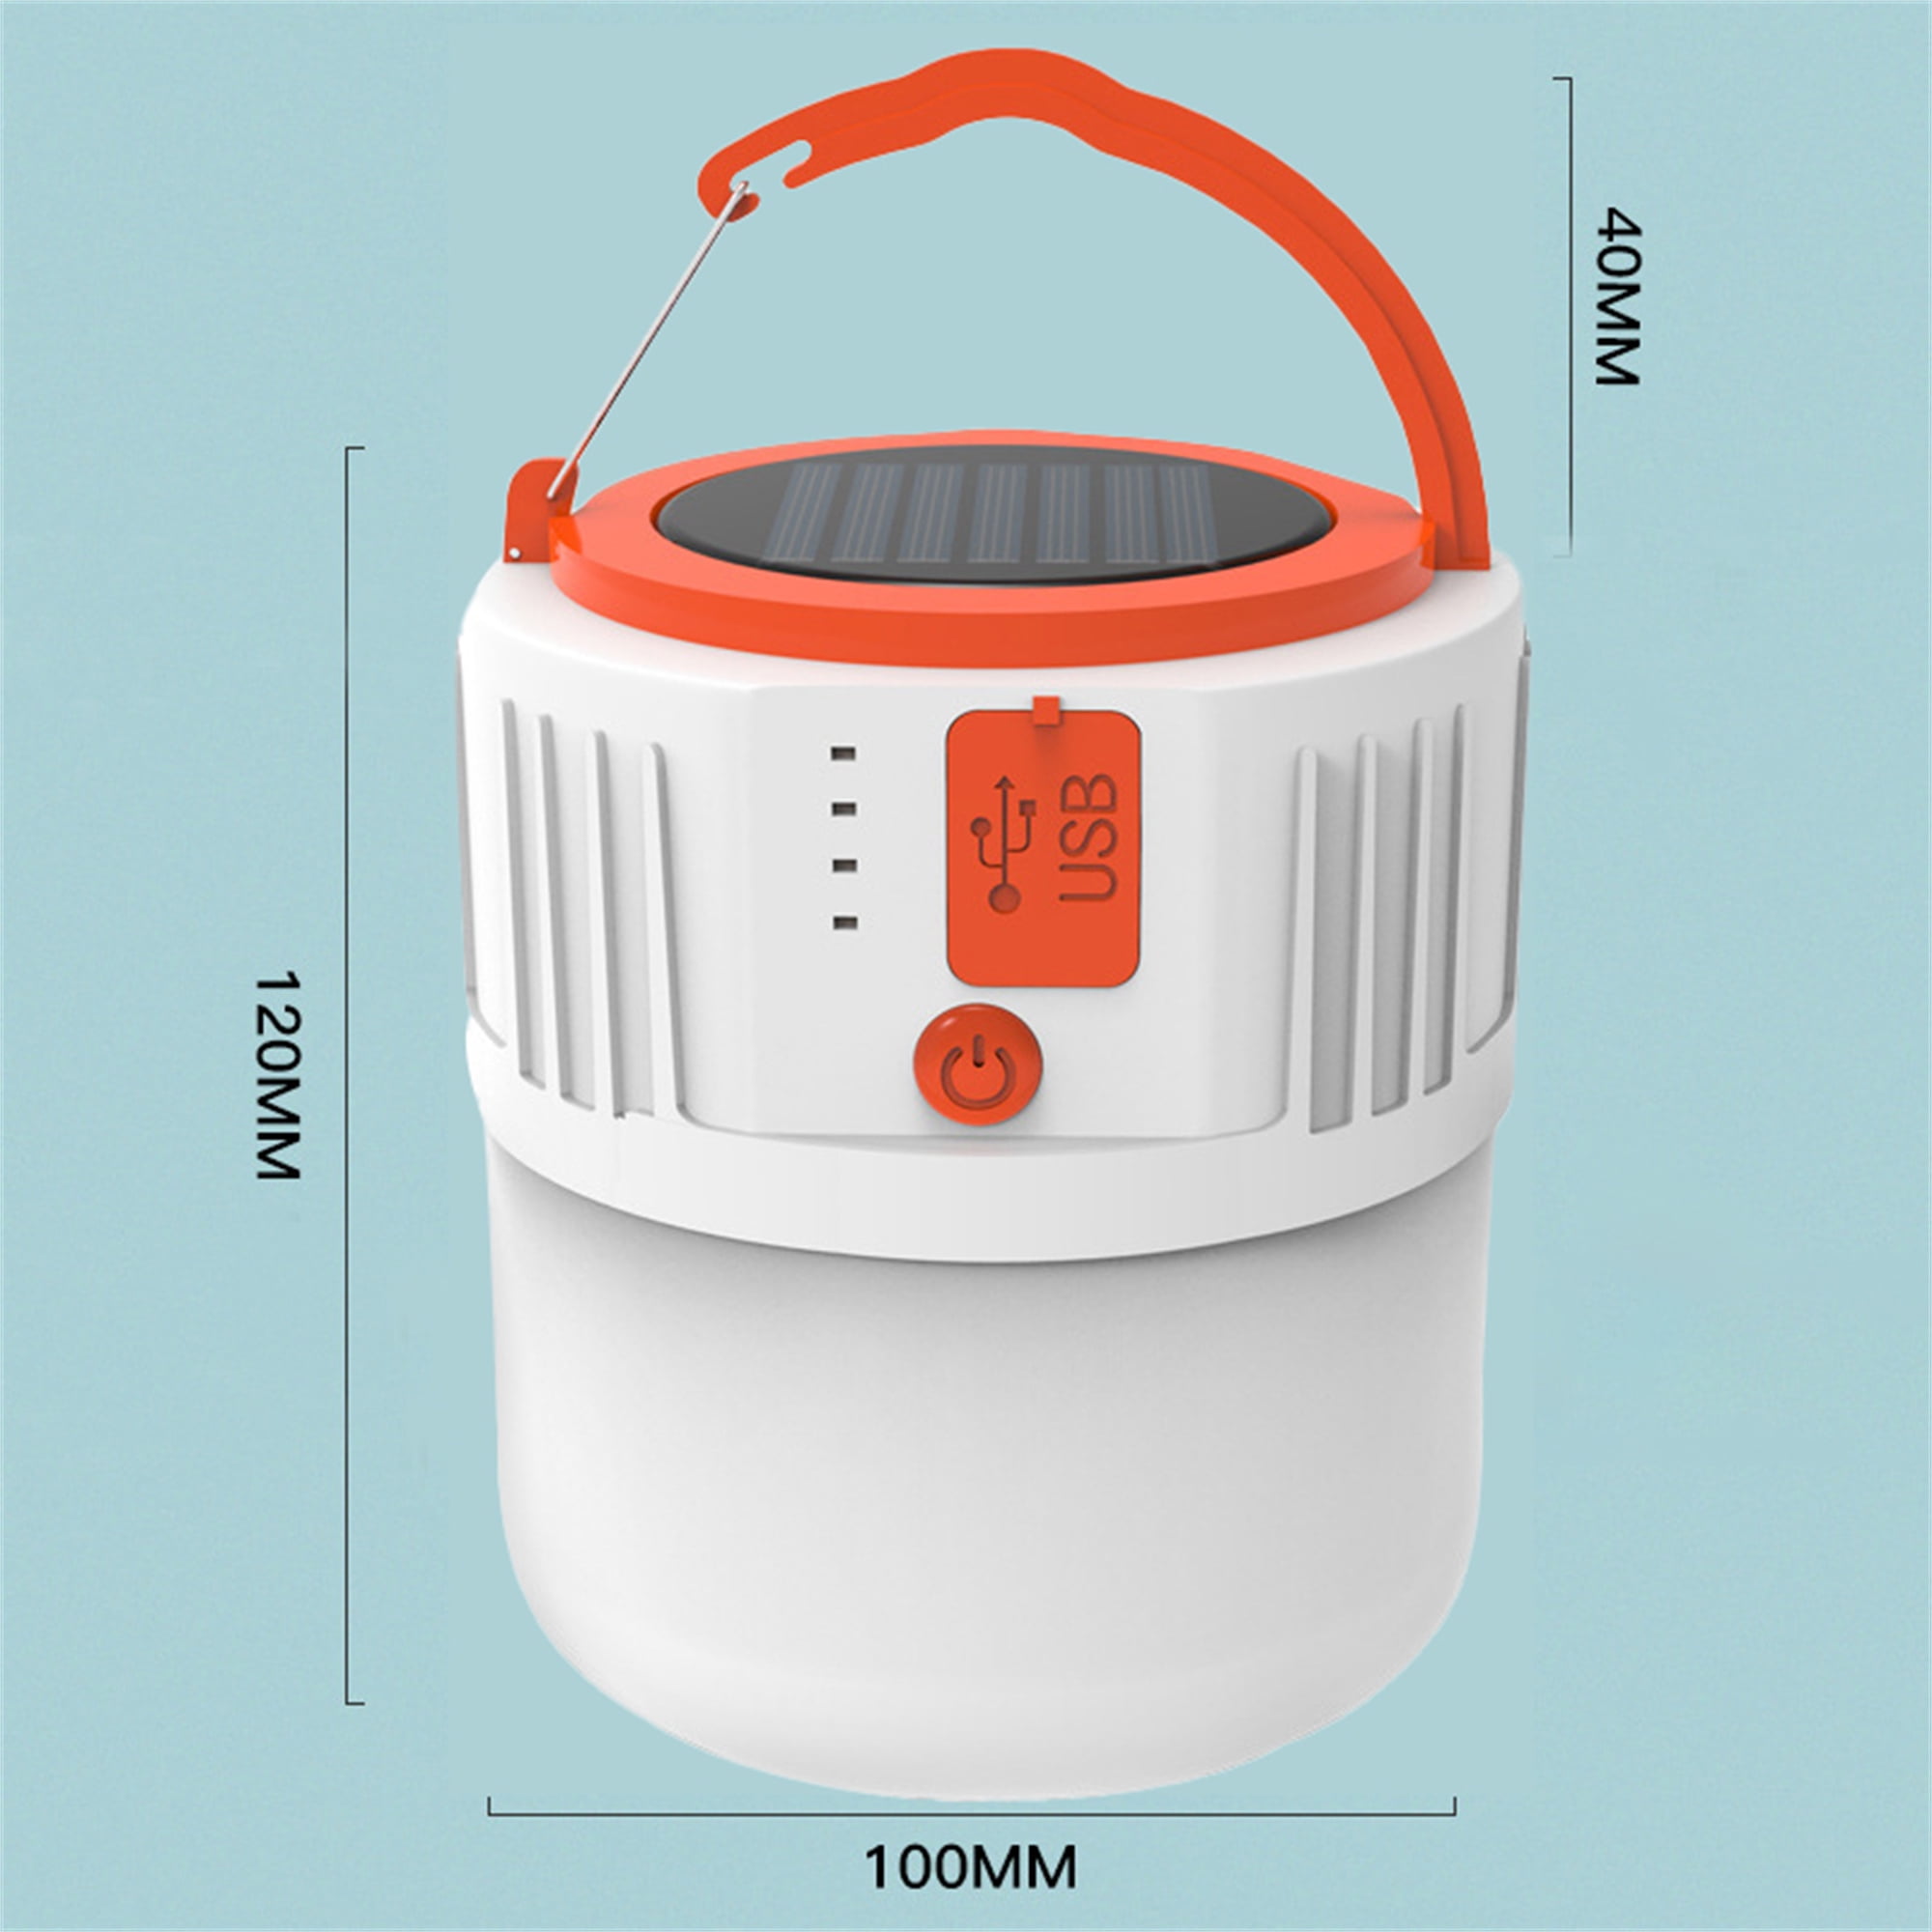 AlpsWolf Camping Lantern, 4000 Capacity Power Bank,6 Modes, IPX4  Waterproof, USB Charging Cable Included